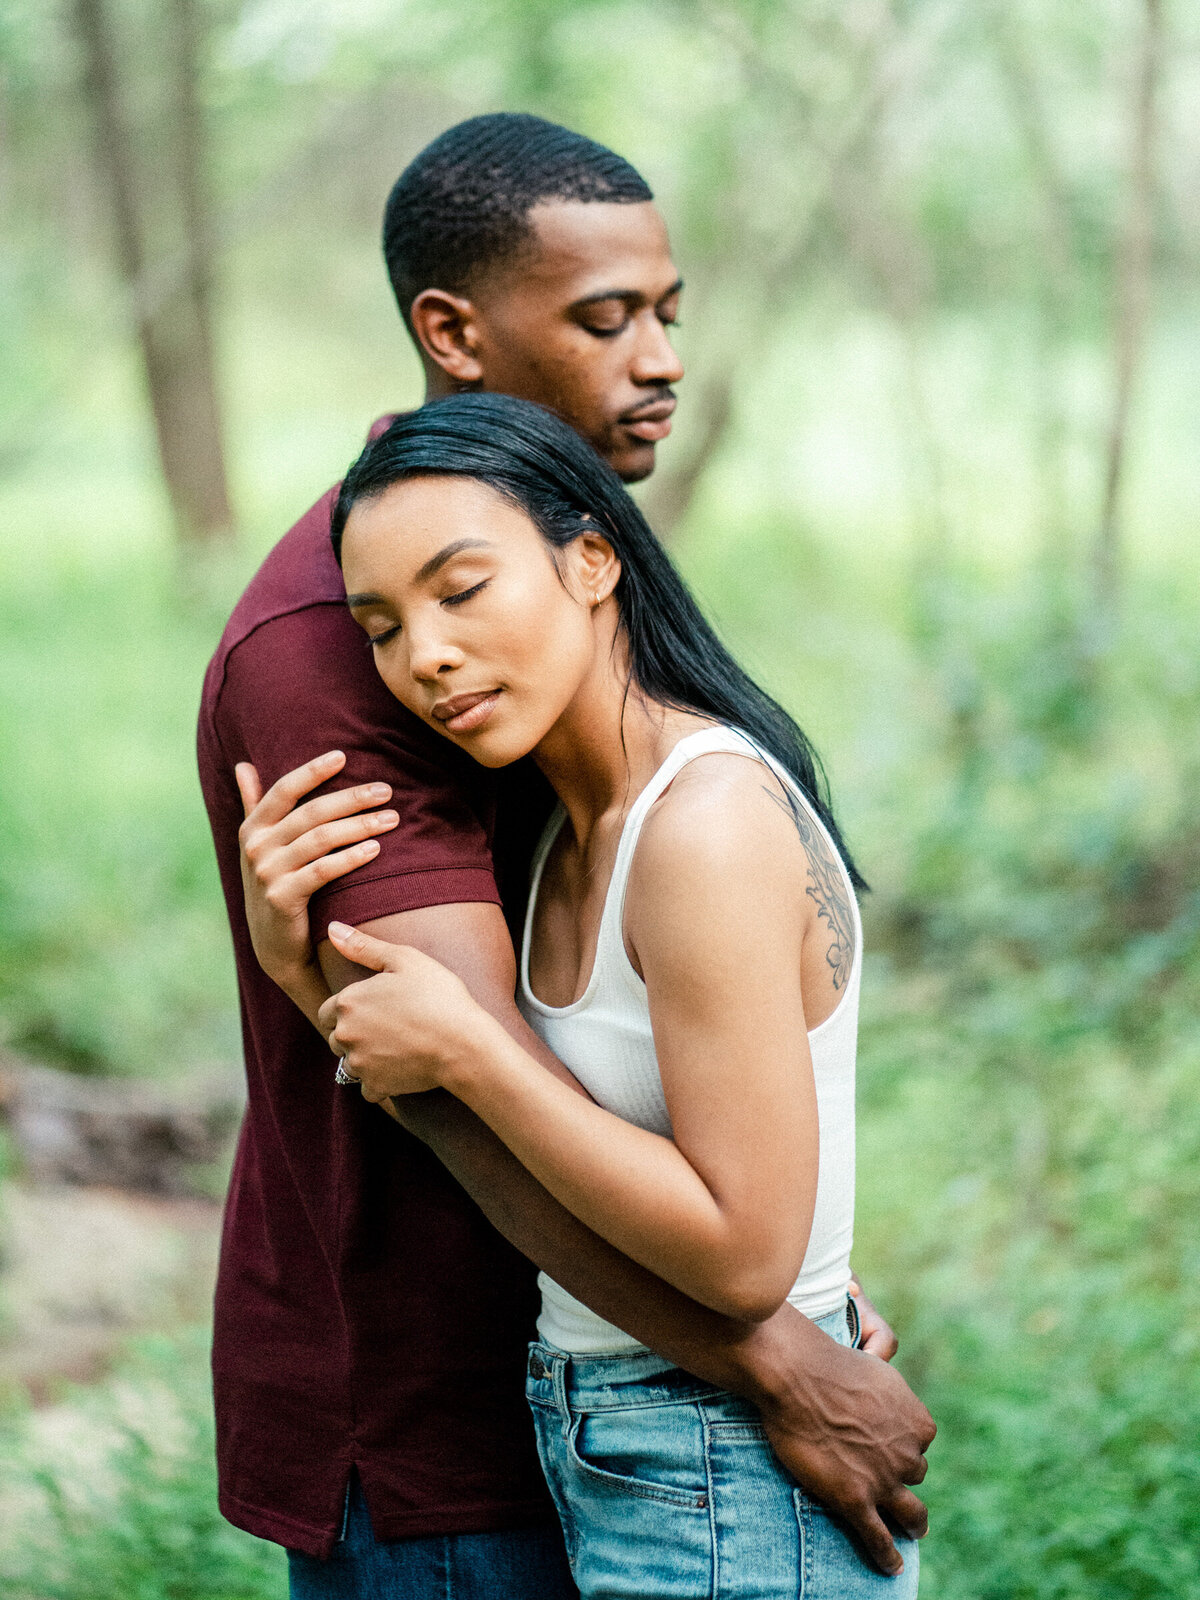 A man and woman embracing in a forest, with the man's eyes closed and the woman's head resting on his shoulder.